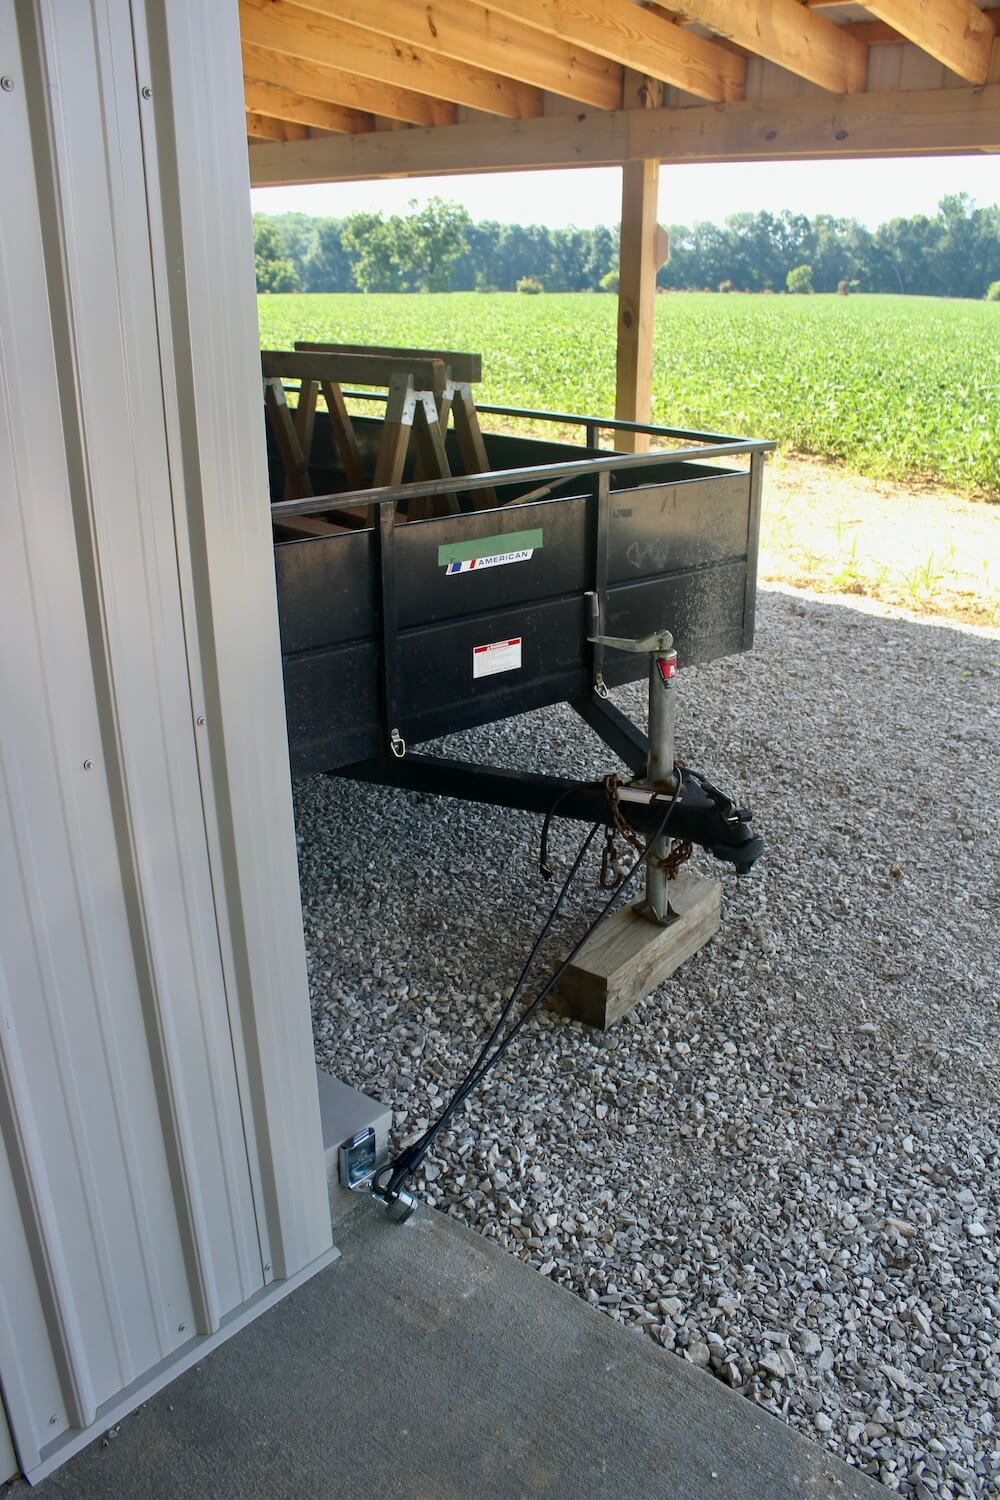 Trailer Tie-Down Anchor, The BEST Solution